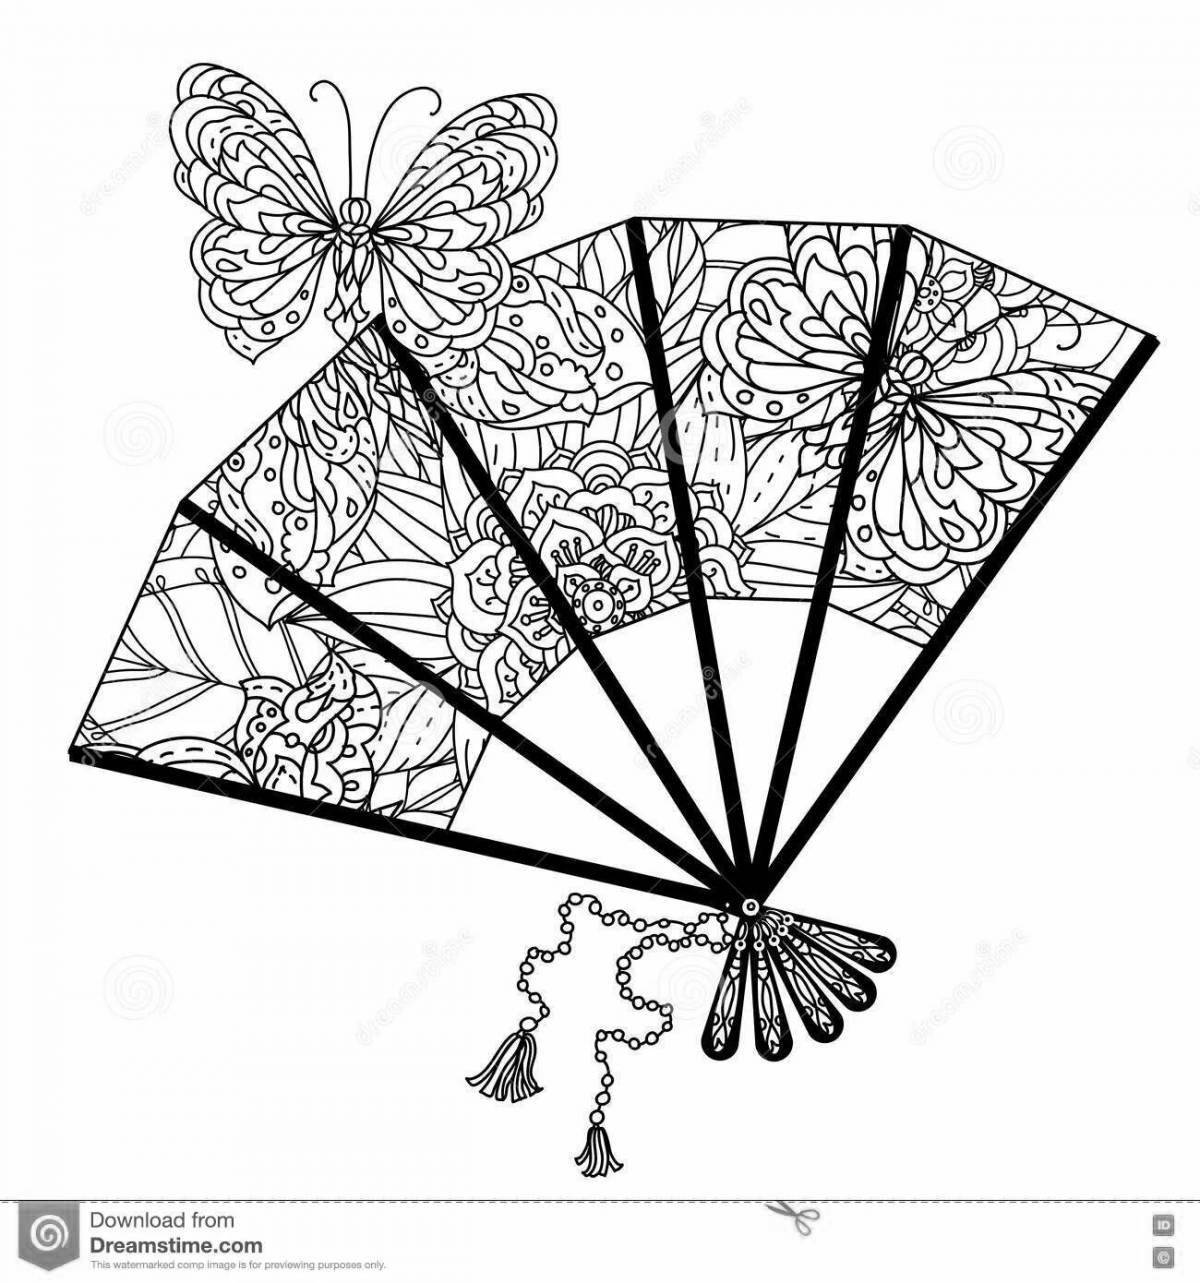 Coloring live Chinese fan